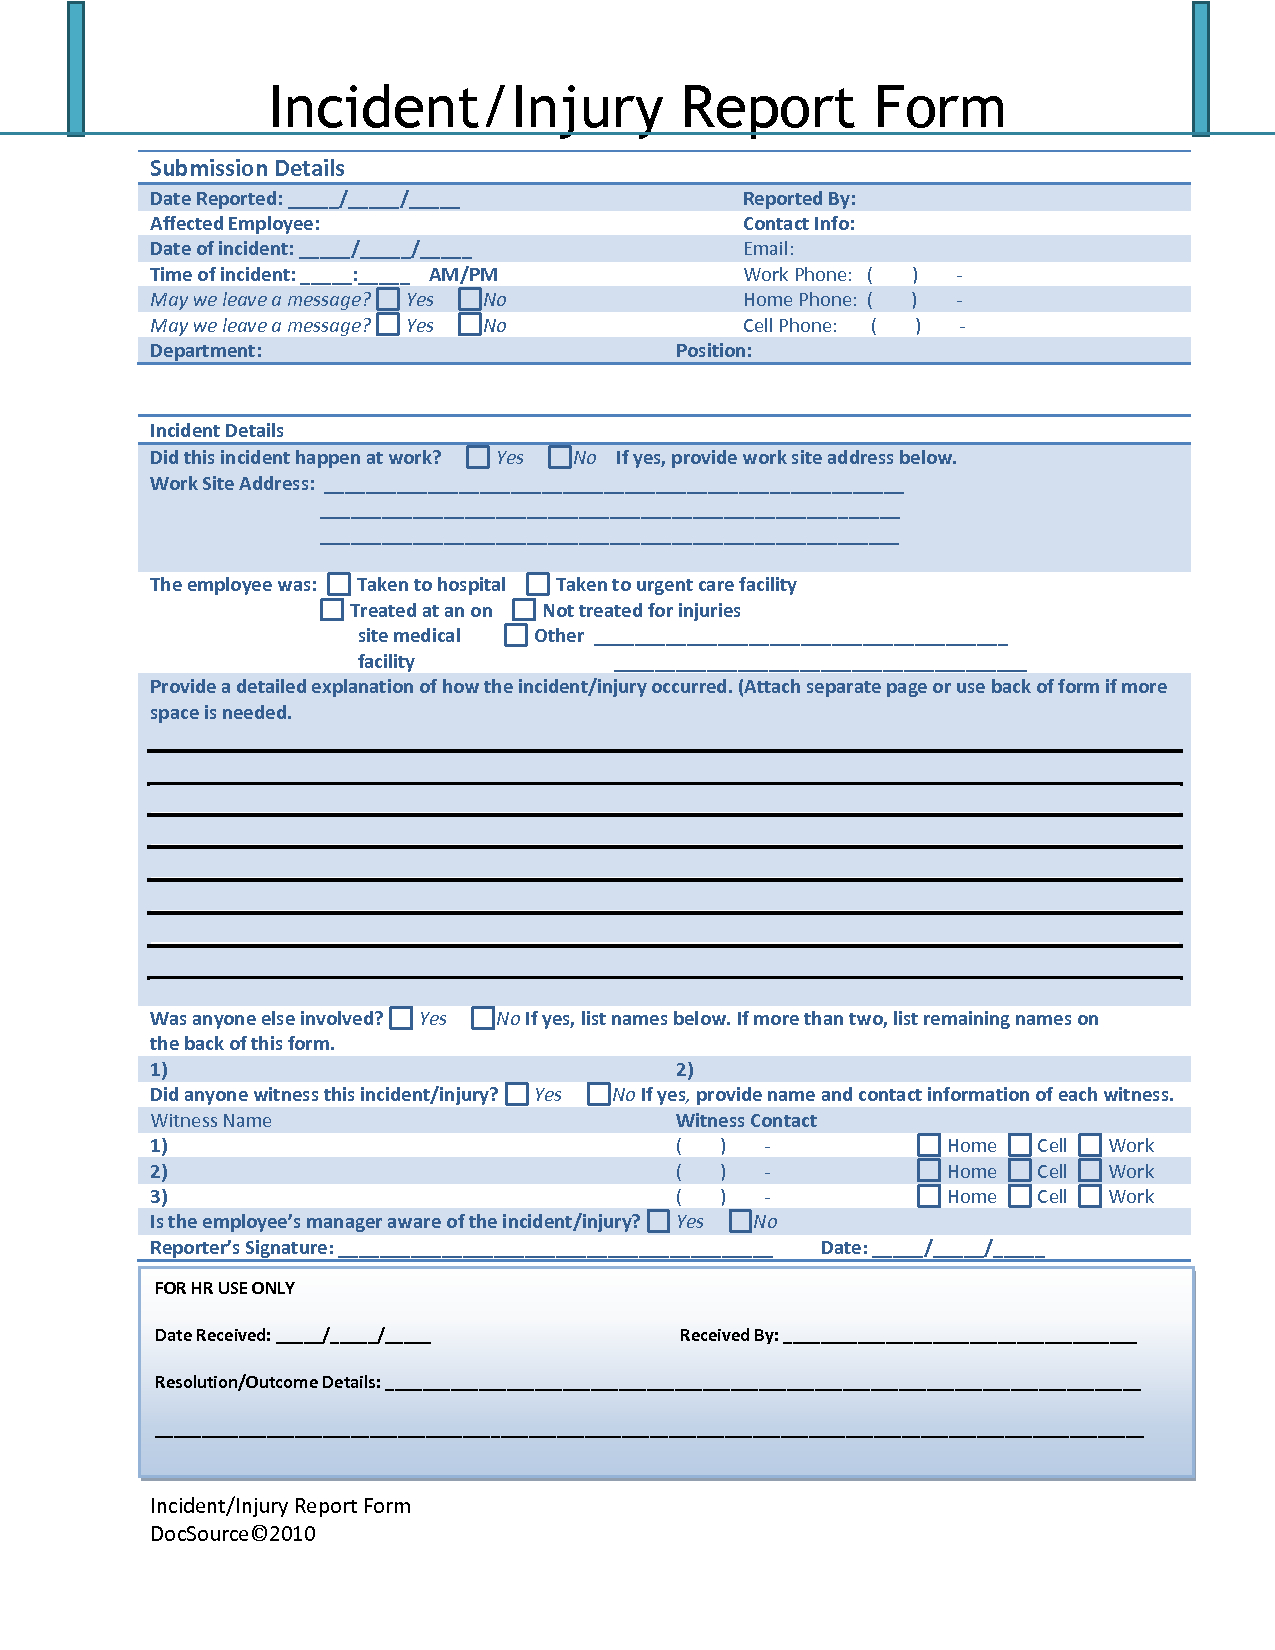 Effective Accident Injury Report Form Template With Blue With Incident Report Form Template Word